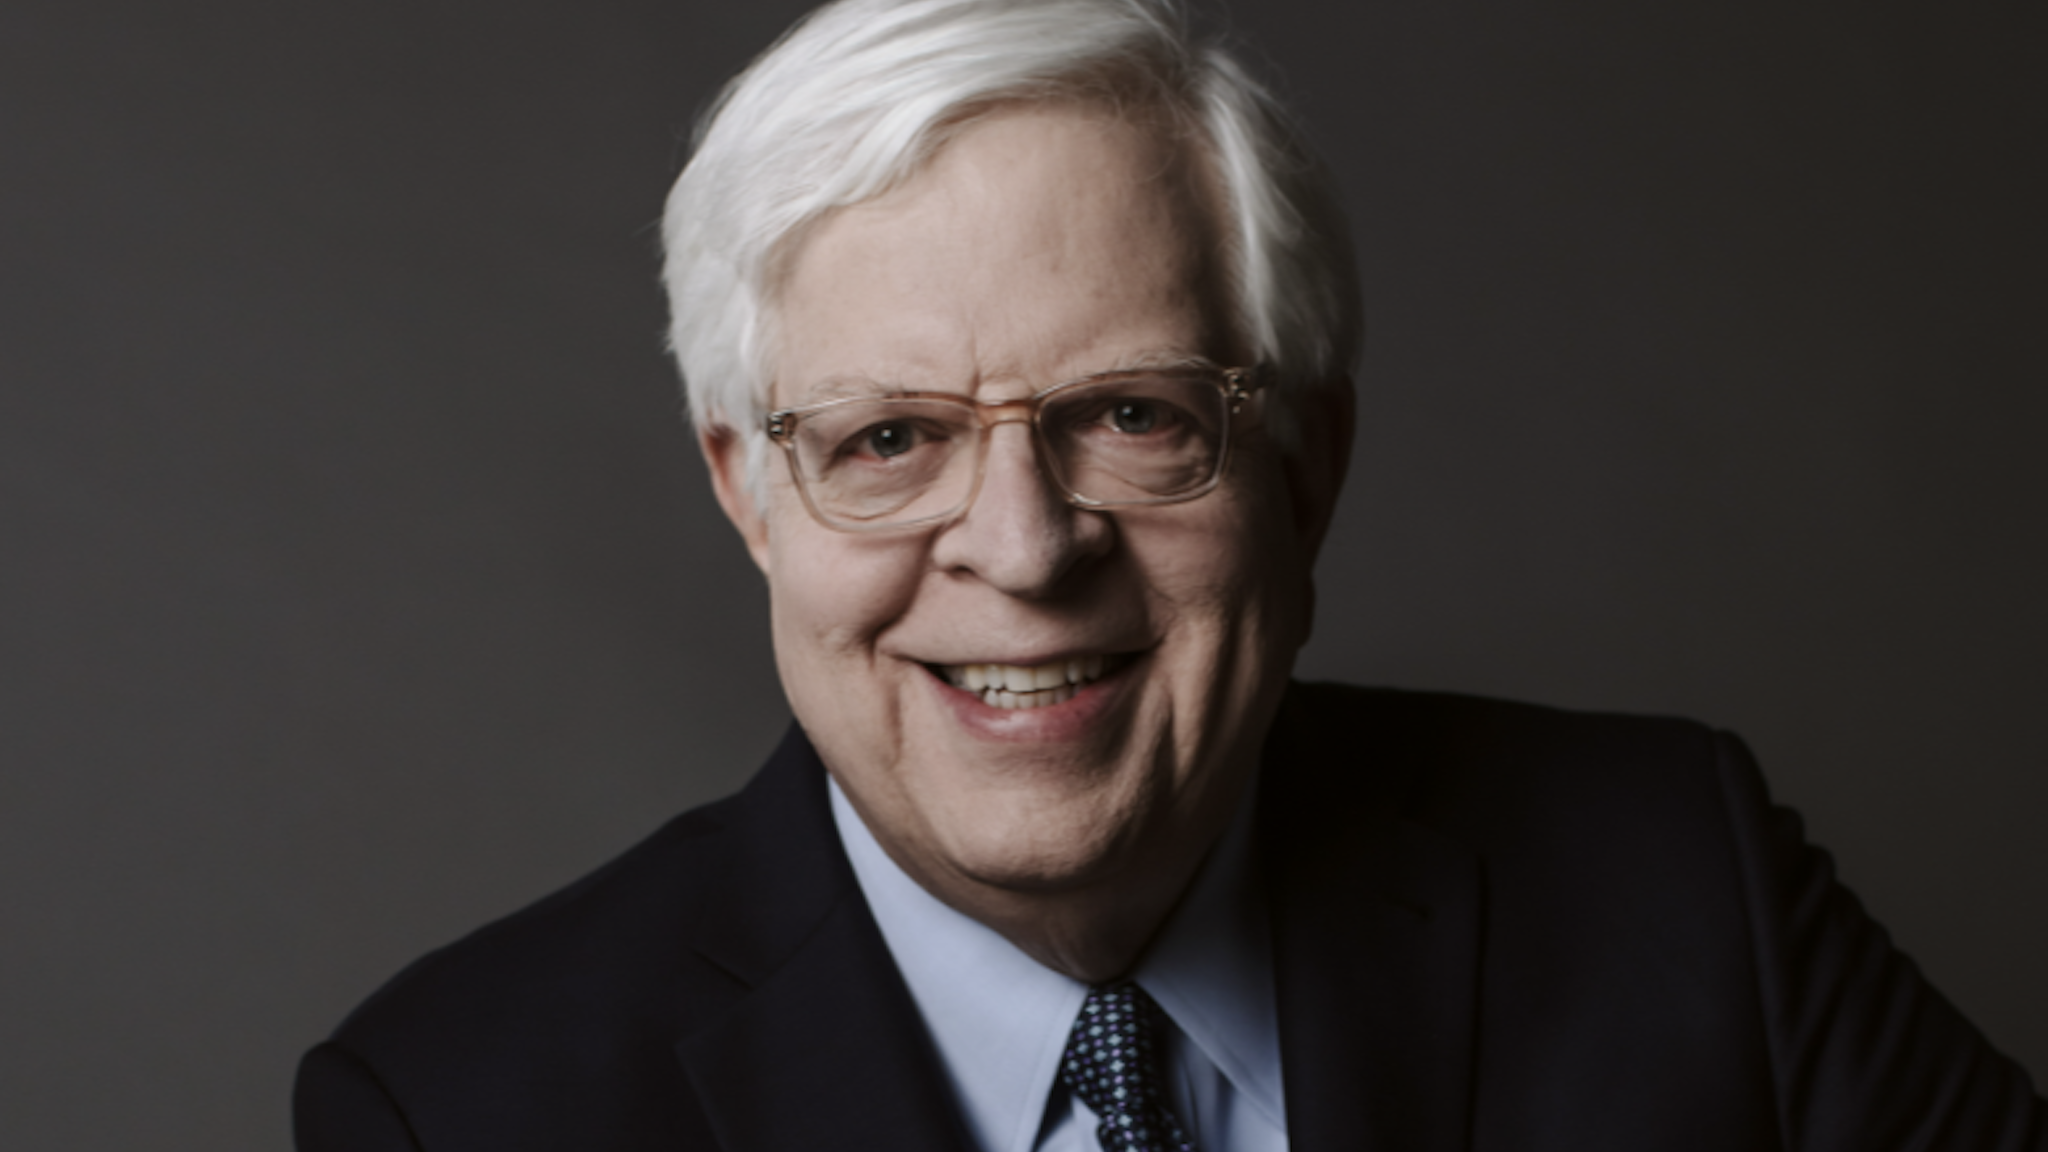 Dennis Prager's new project for Daily Wire+ looks at how secular extremism threatens our society.